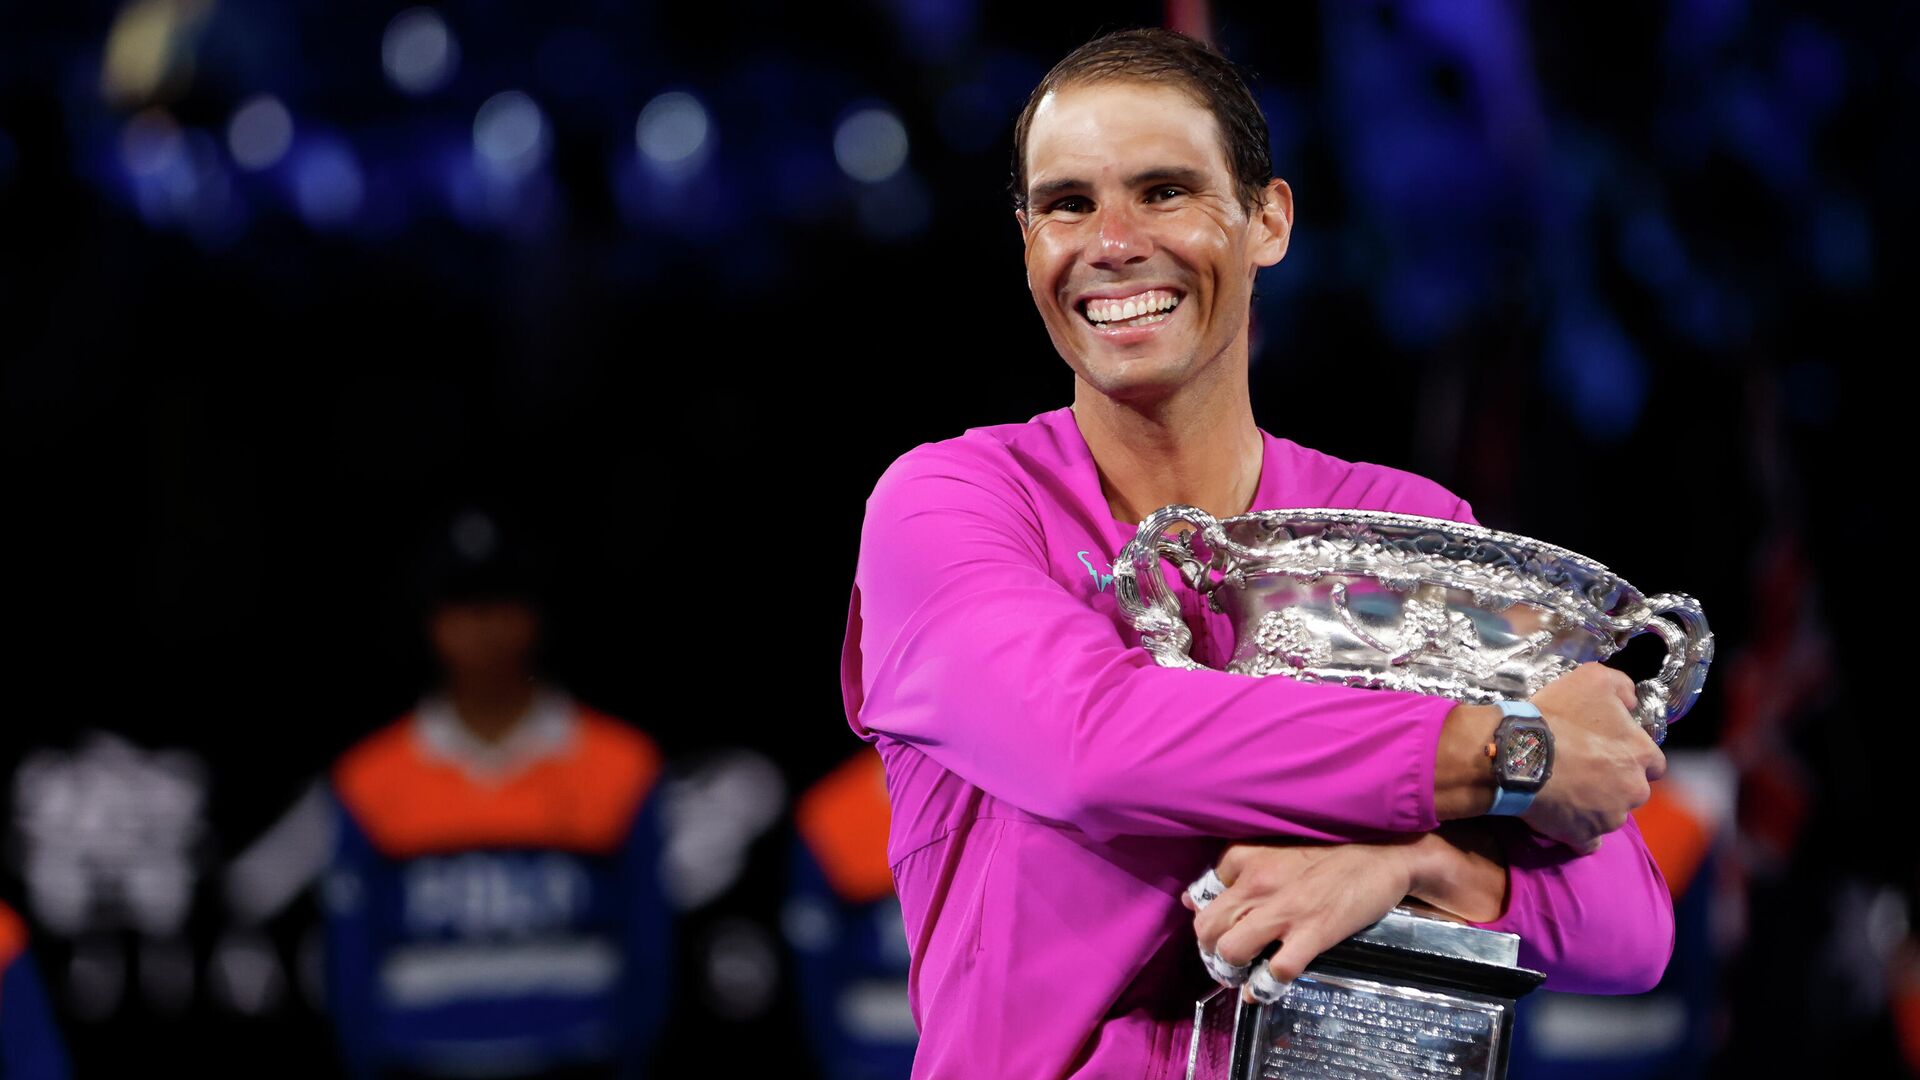 Rafael Nadal of Spain embraces the Norman Brookes Challenge Cup after defeating Daniil Medvedev of Russia in the men's singles final at the Australian Open tennis championships in Melbourne, Australia, early Monday, Jan. 31, 2022. - Sputnik International, 1920, 31.01.2022